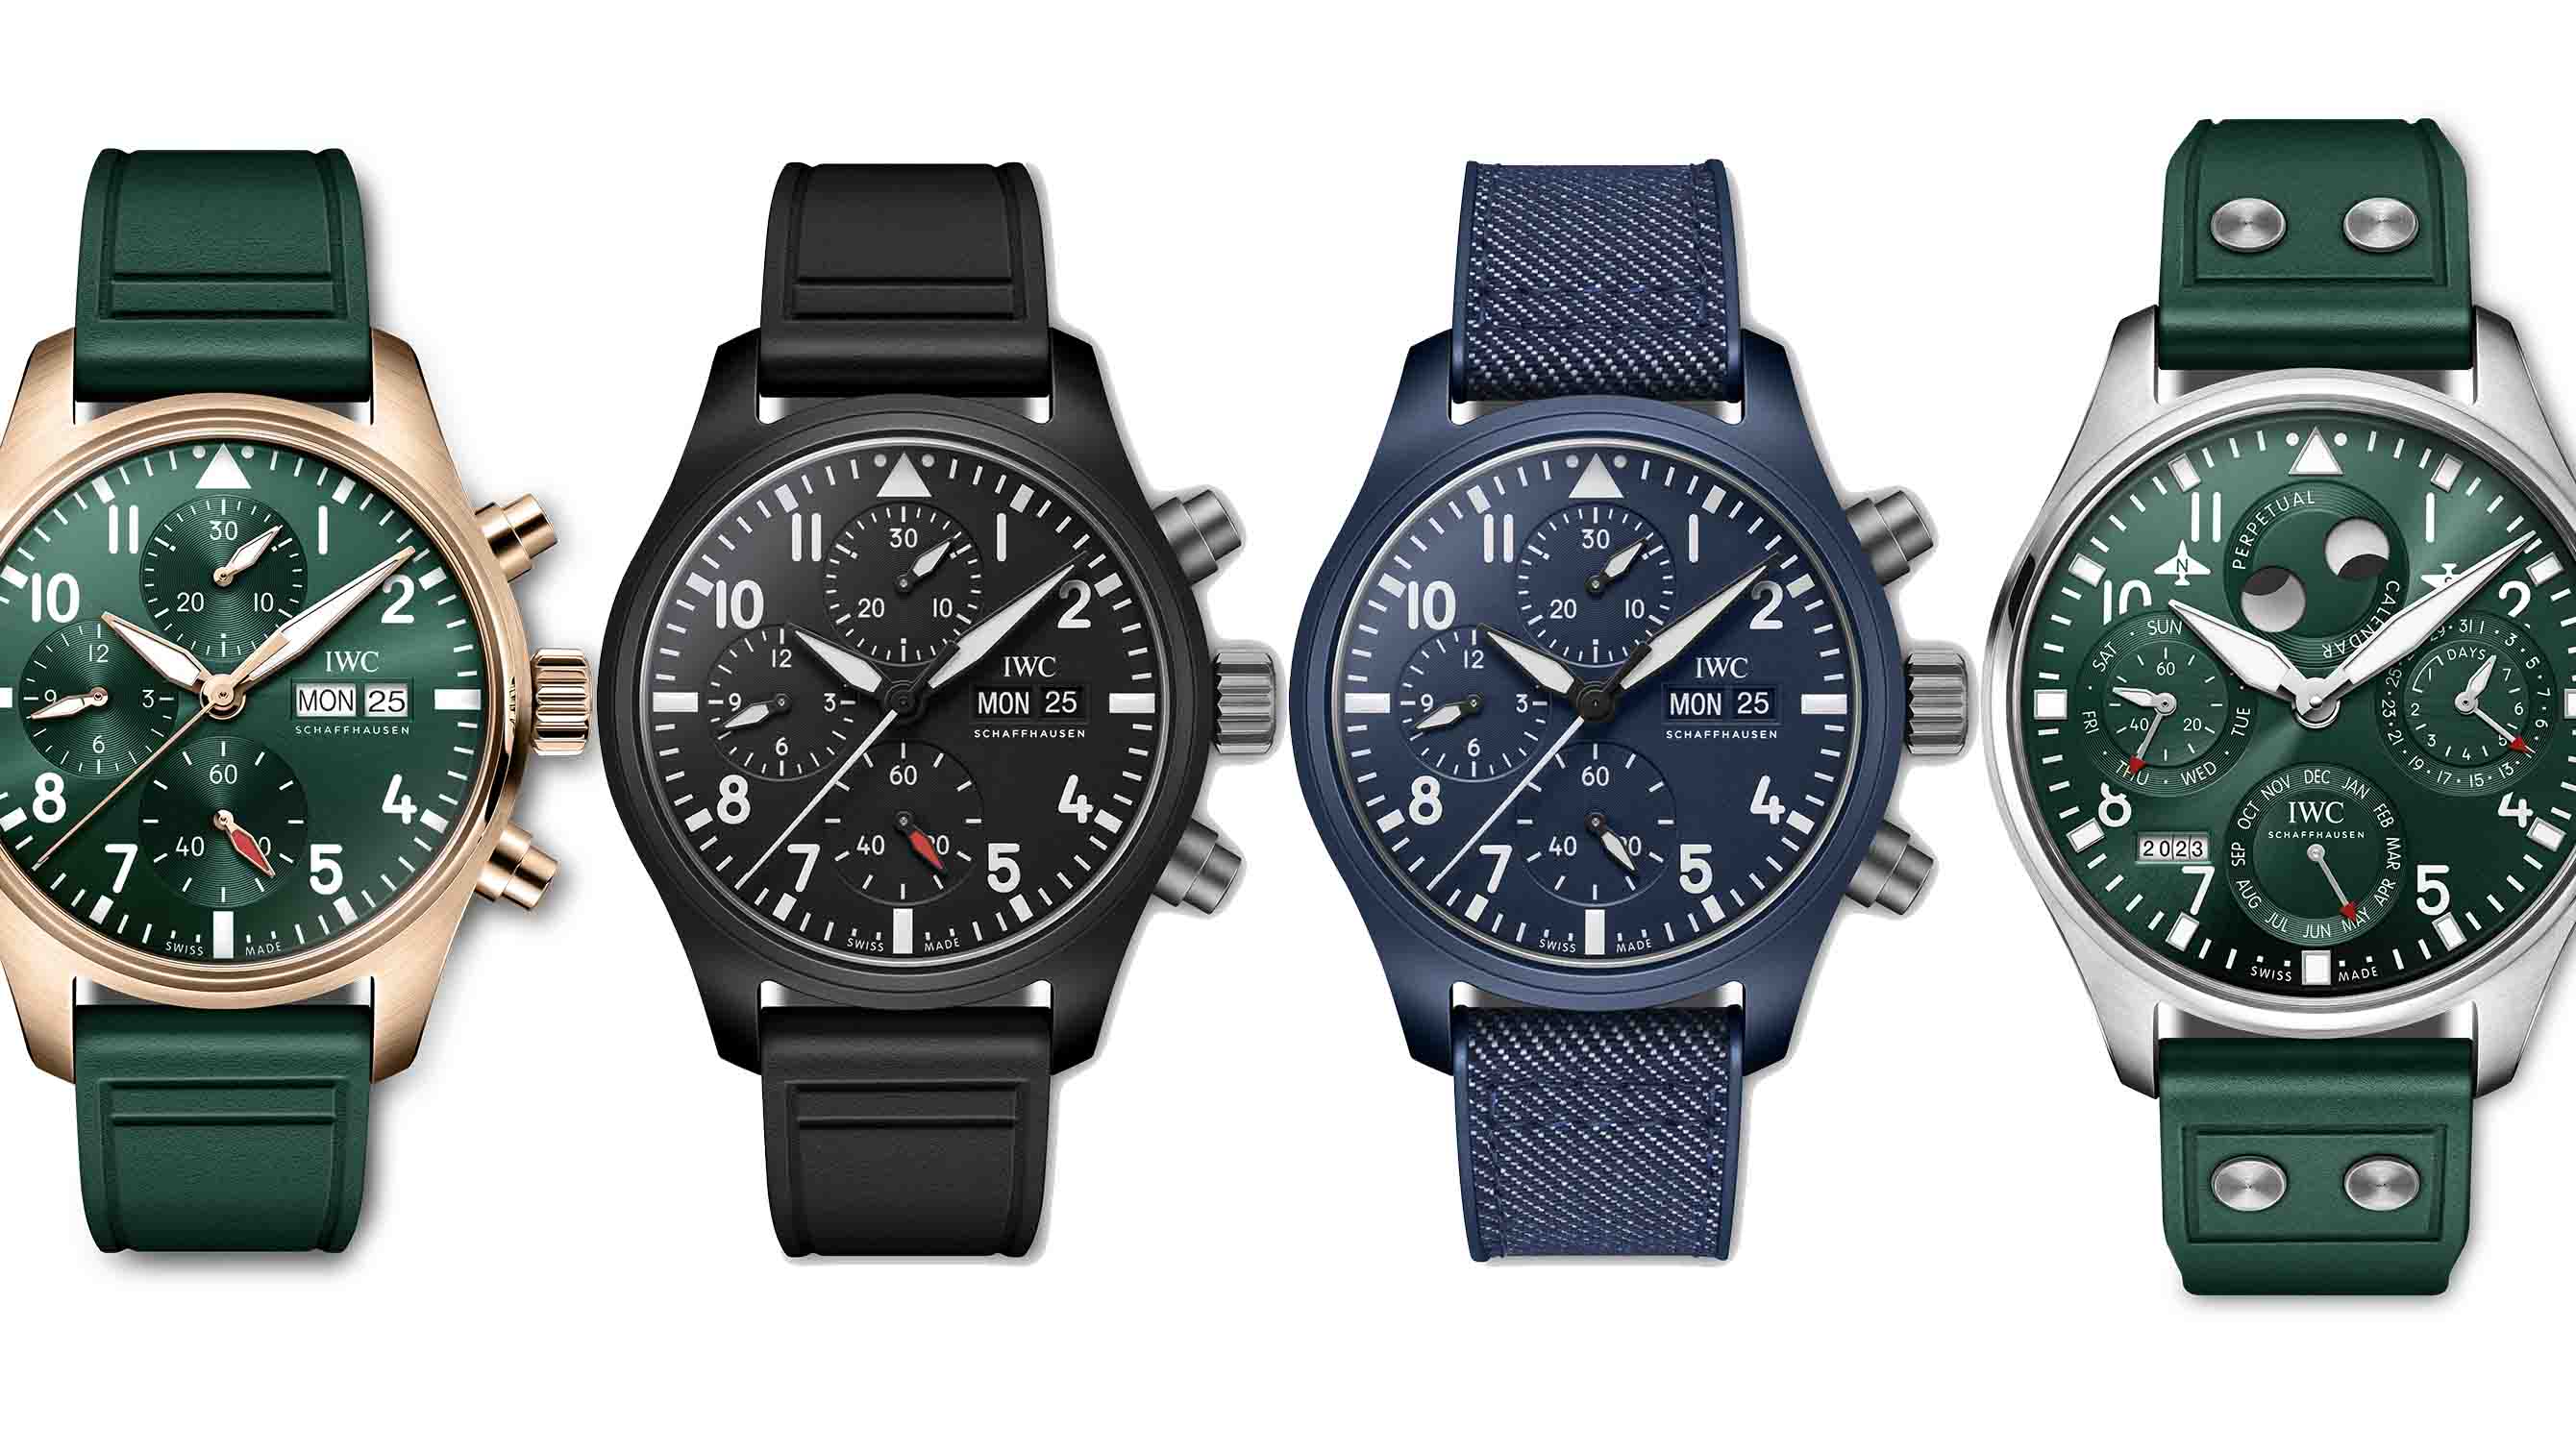 IWC’s Pilot’s Watch line-up gets four new additions